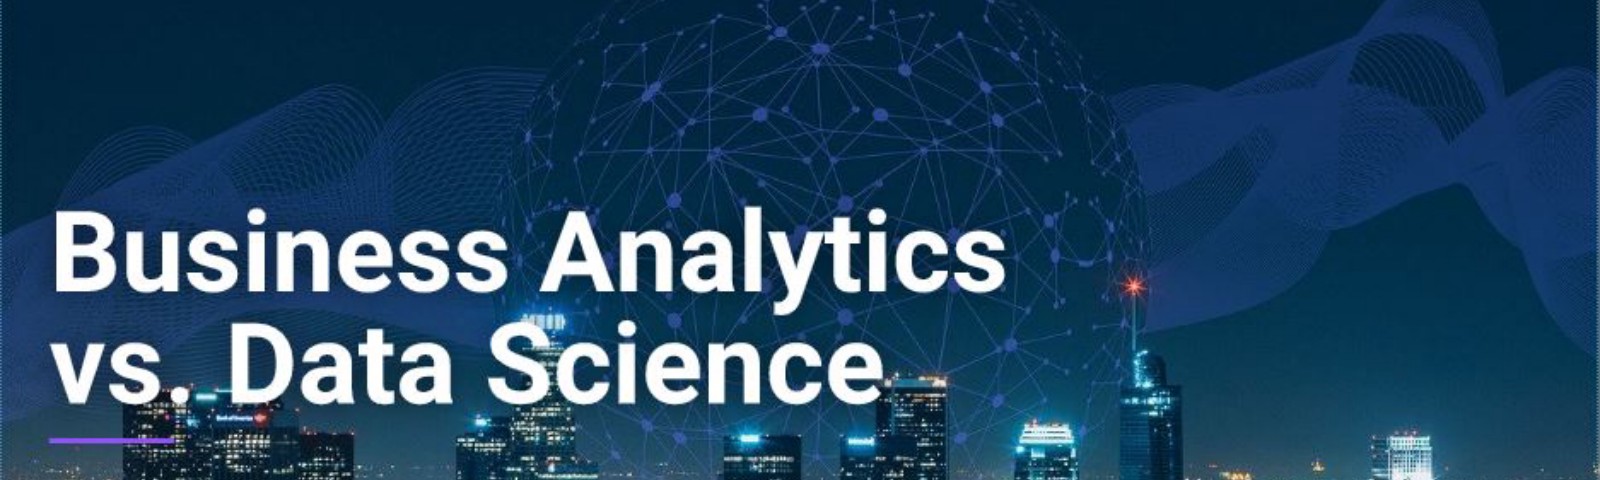 Professional Certificate Program in Data Science and Business Analytics